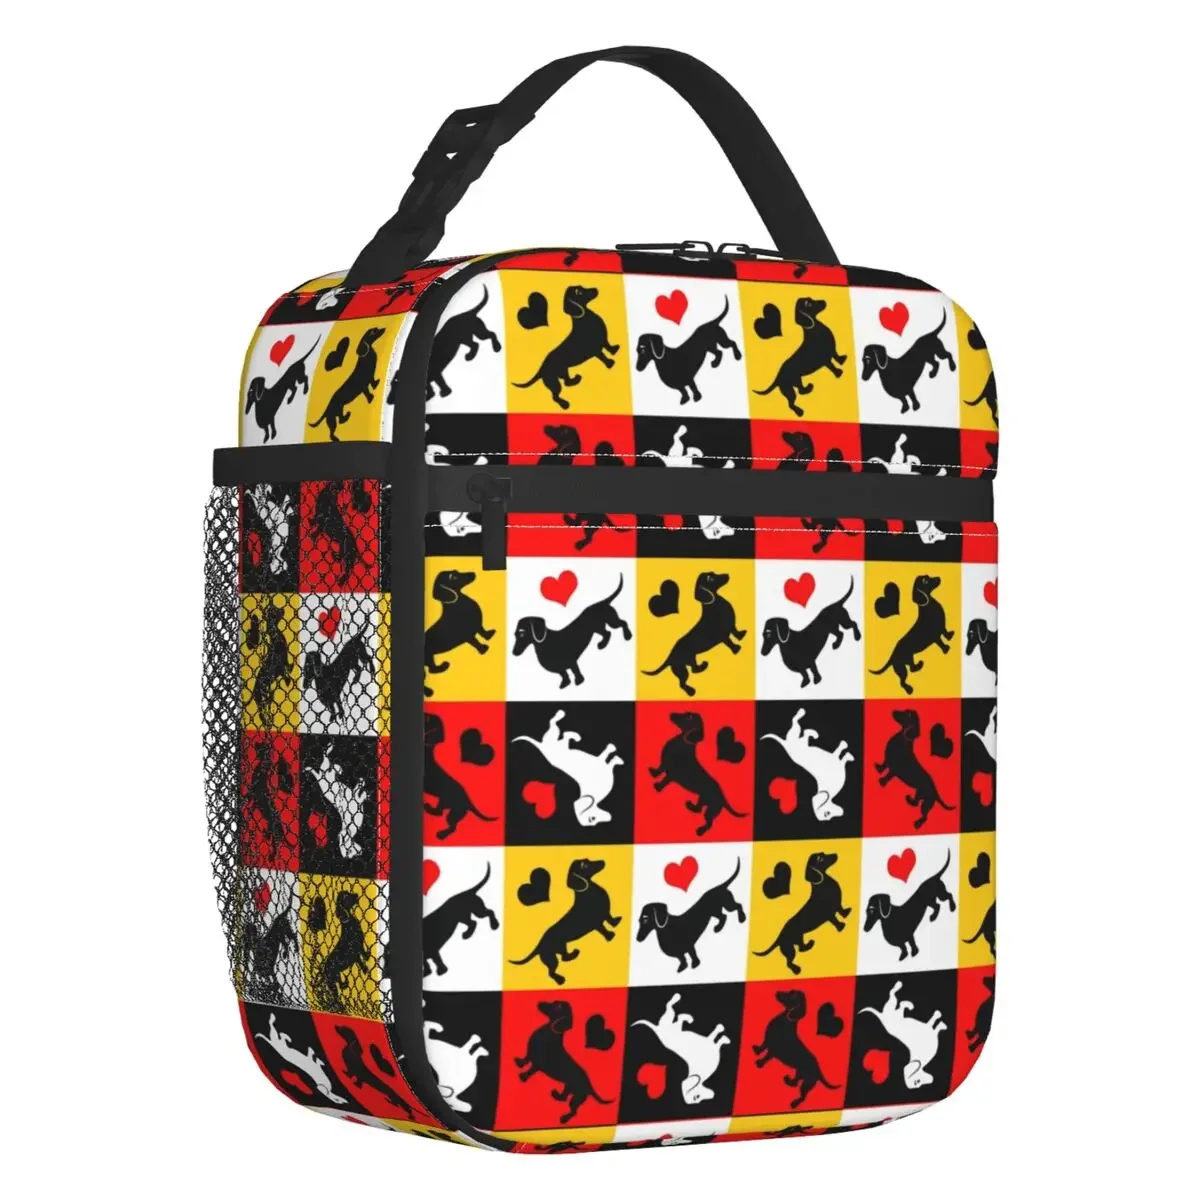 

Dachshunds And Hearts Resuable Lunch Box Multifunction Gingham Check Pattern Sausage Thermal Cooler Food Insulated Lunch Bag